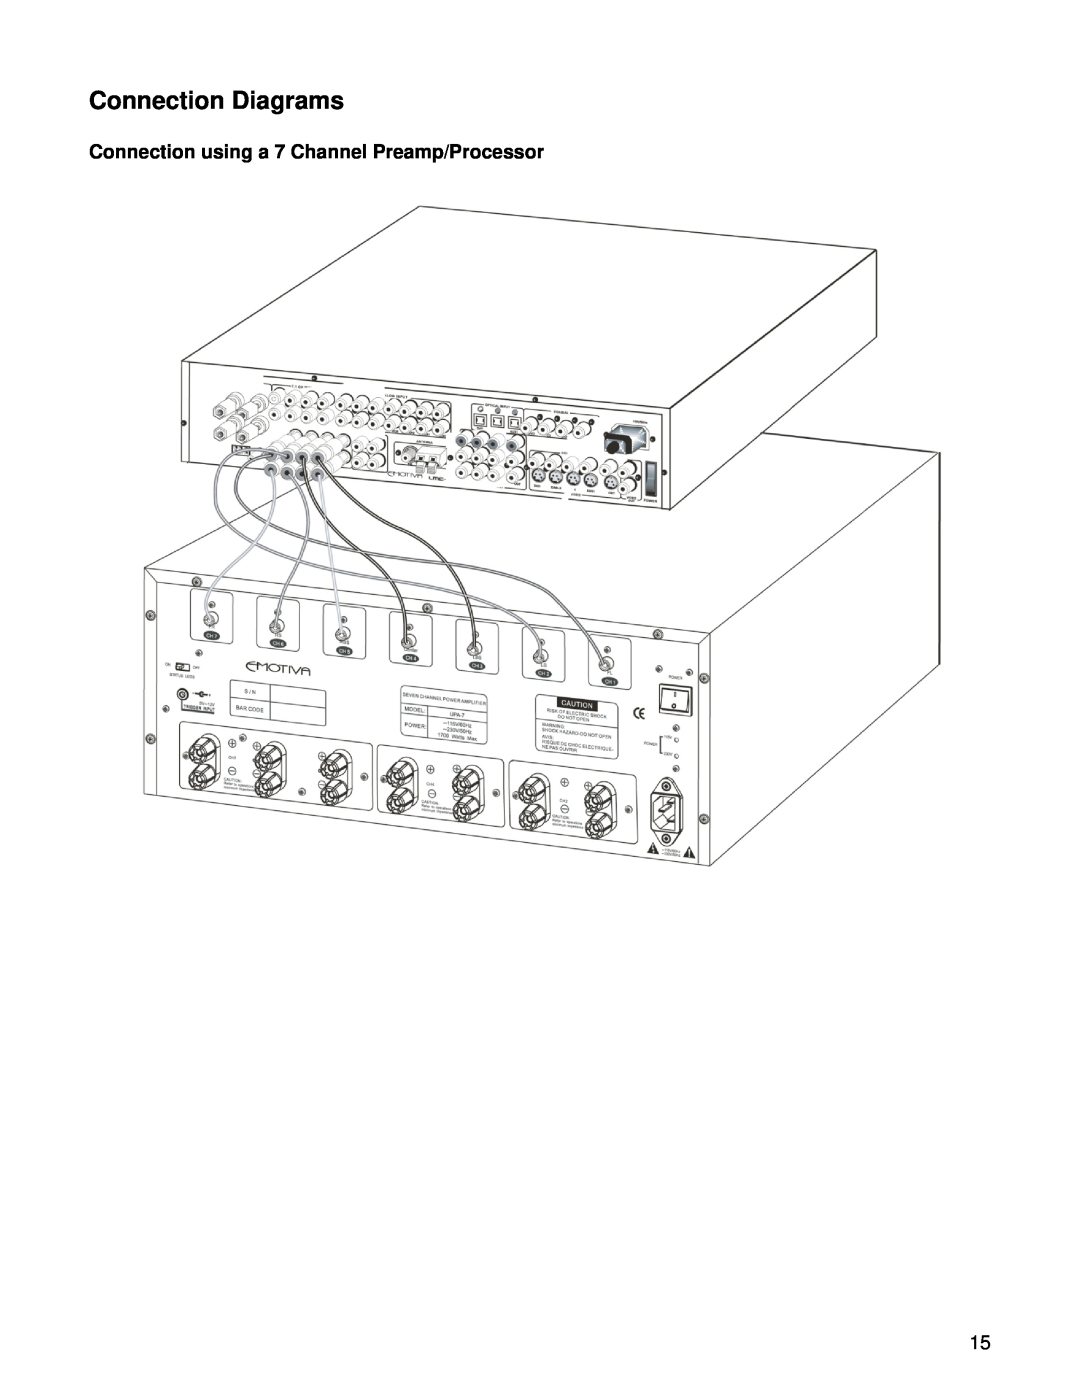 Emotiva UPA-7 manual Connection Diagrams, Connection using a 7 Channel Preamp/Processor 